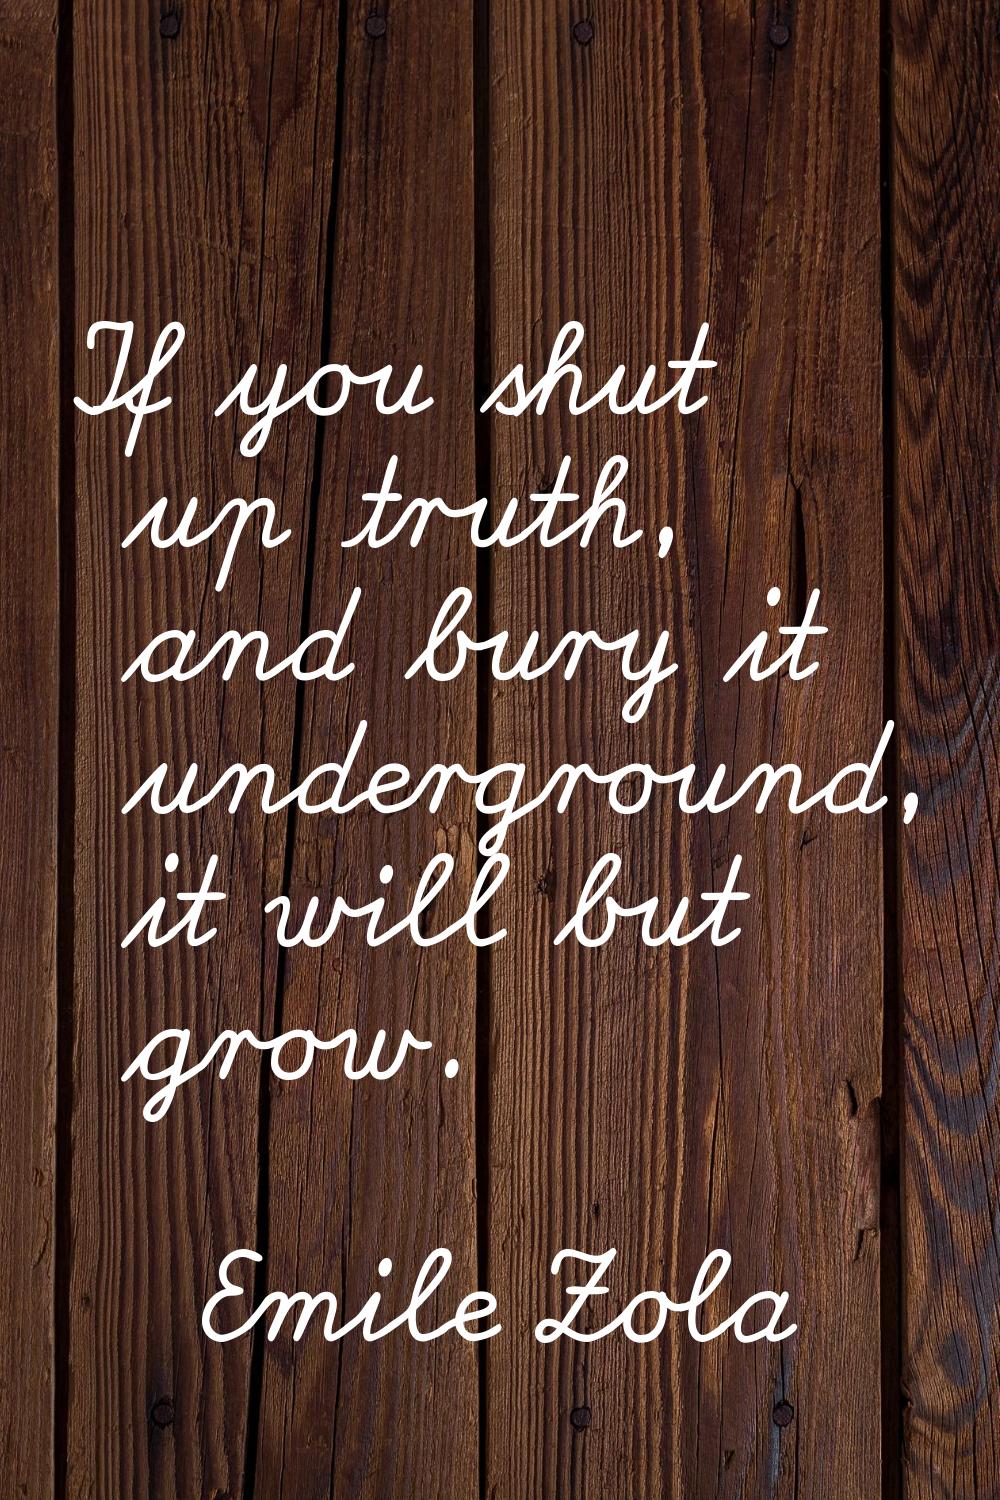 If you shut up truth, and bury it underground, it will but grow.